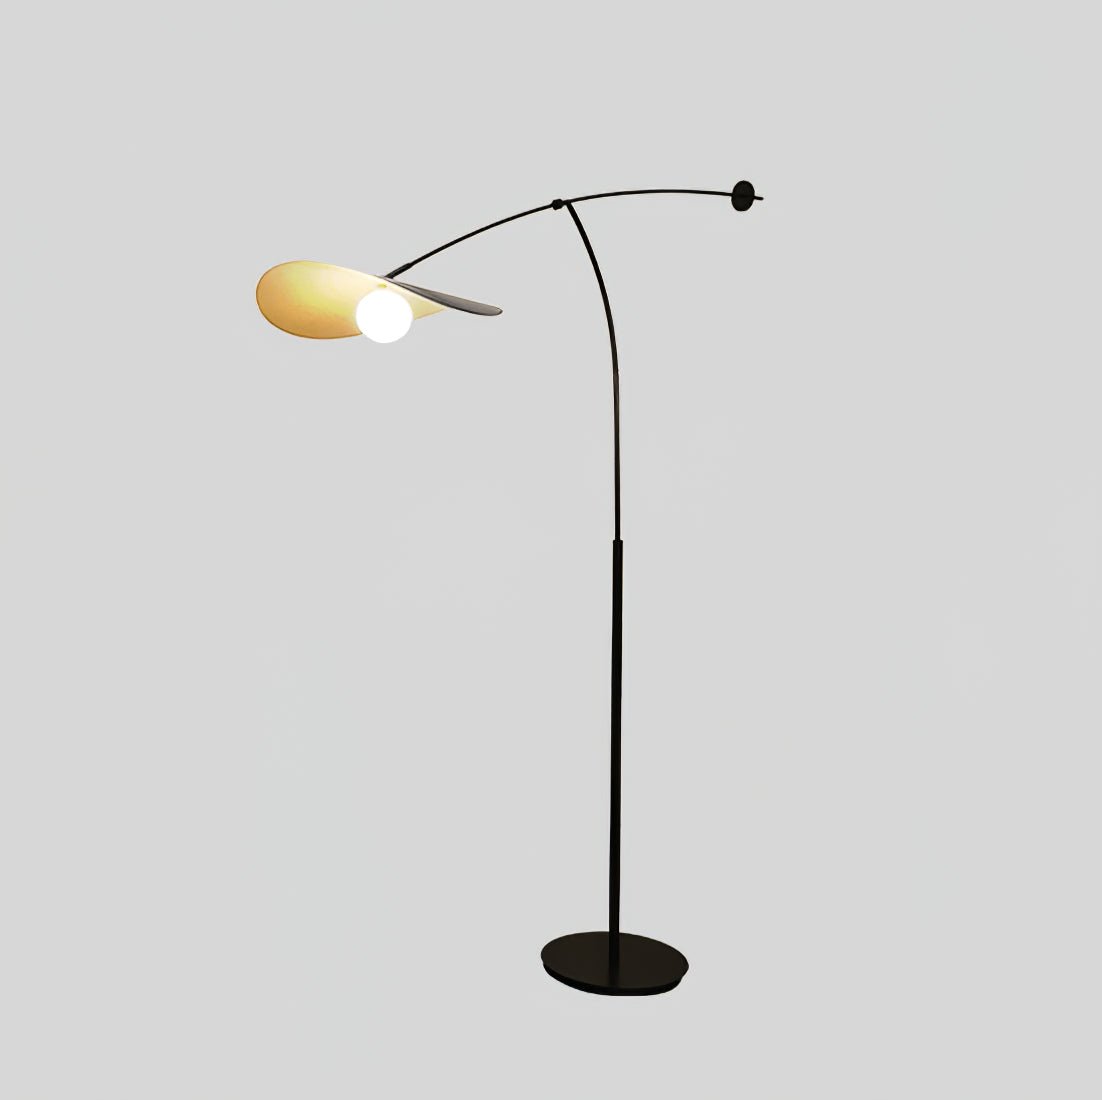 Alonso Floor Lamp with dimensions of 47.2″ x 62.9″ (120cm x 160cm), in a sleek Black and Gold design, with a UK plug